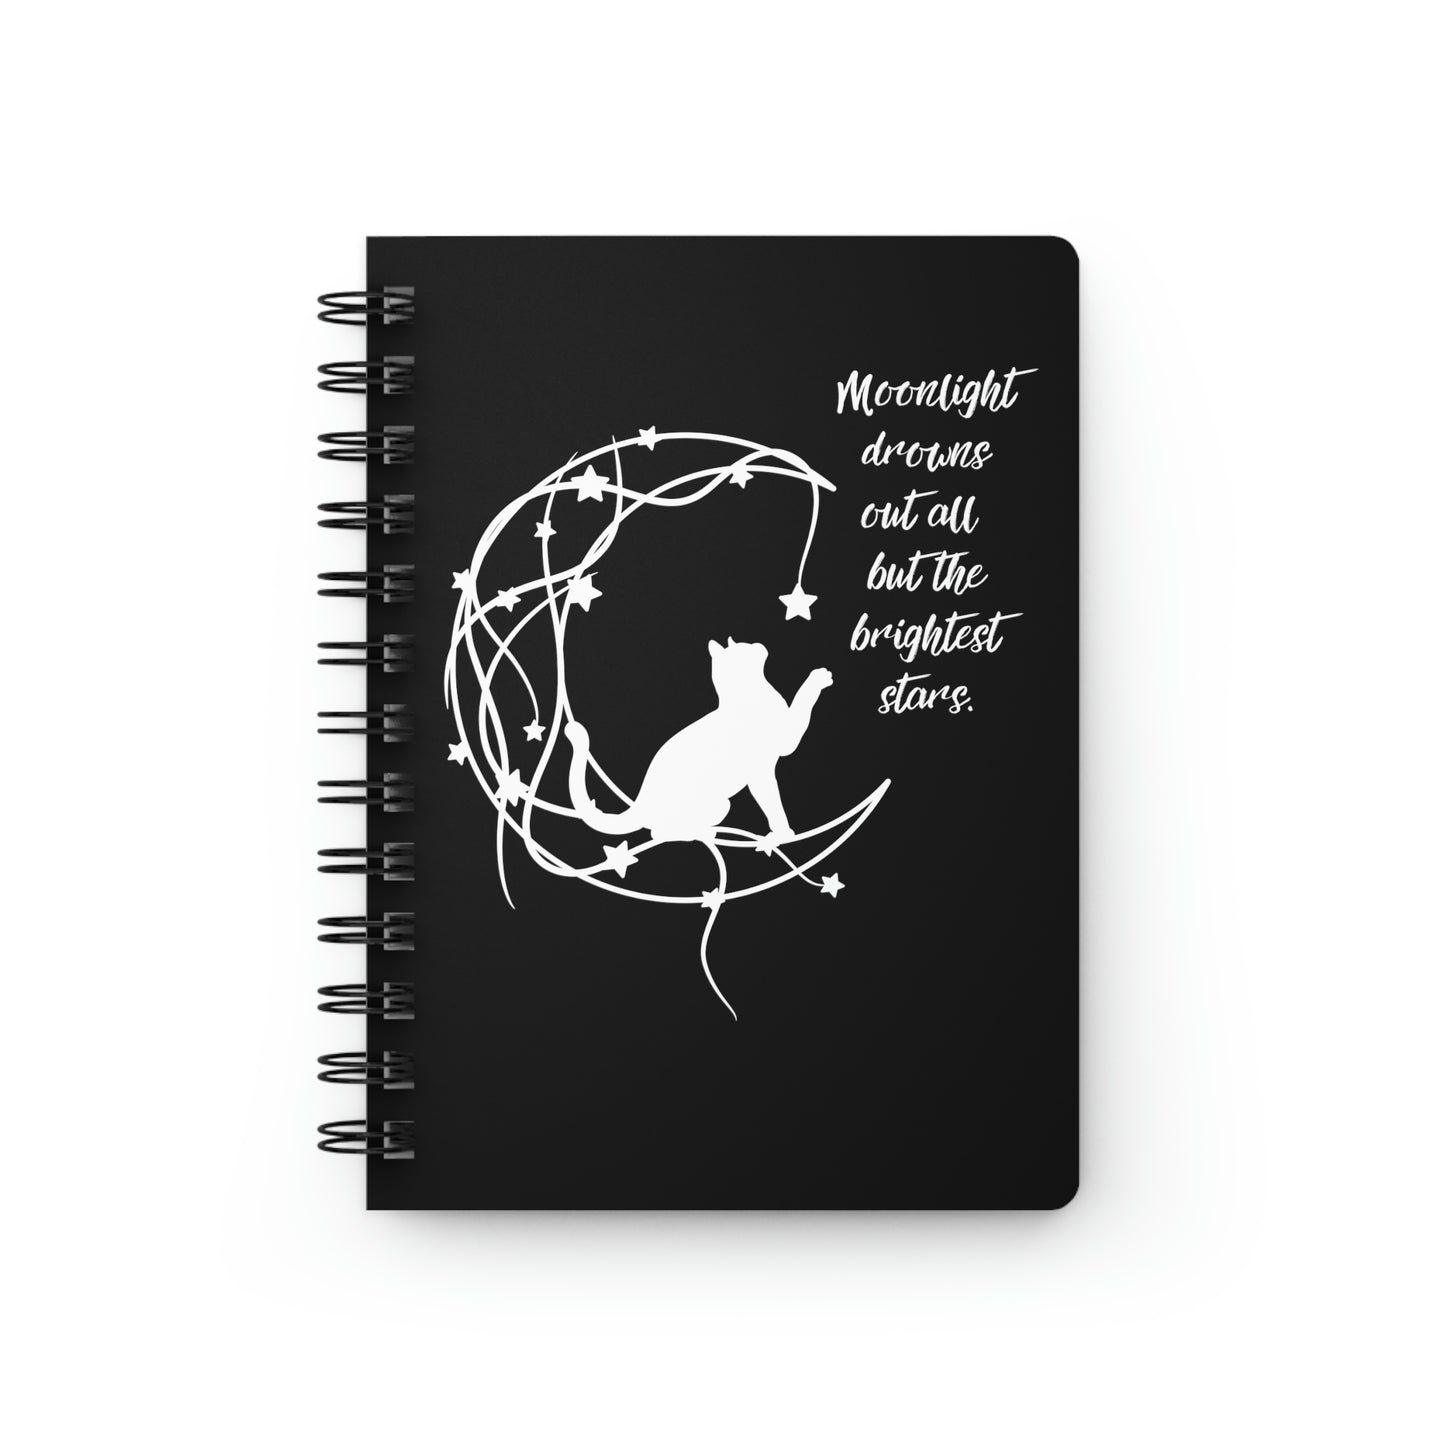 Cat and moon Spiral Bound Journal, celestial notebook, whimsical journal, fantasy notebook, magical notebook, witchy journal, cat lover gift